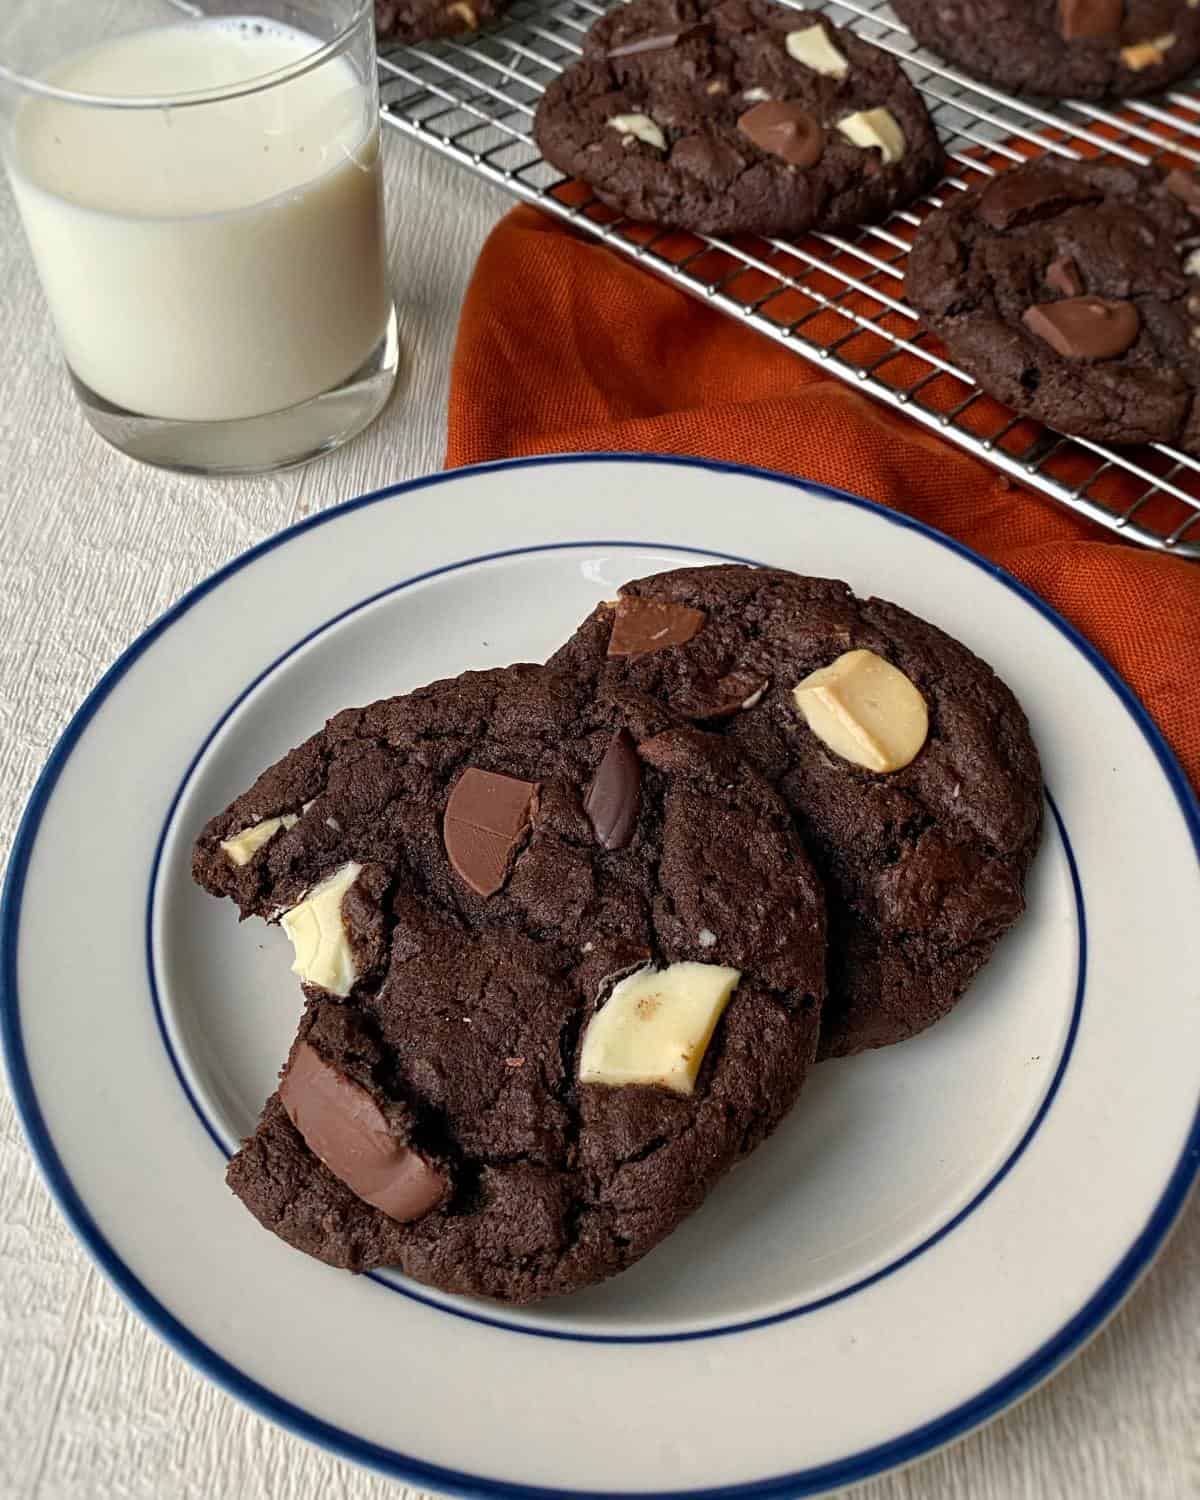 Two triple chocolate chip cookies served on a white plate with a small glass of milk in the background